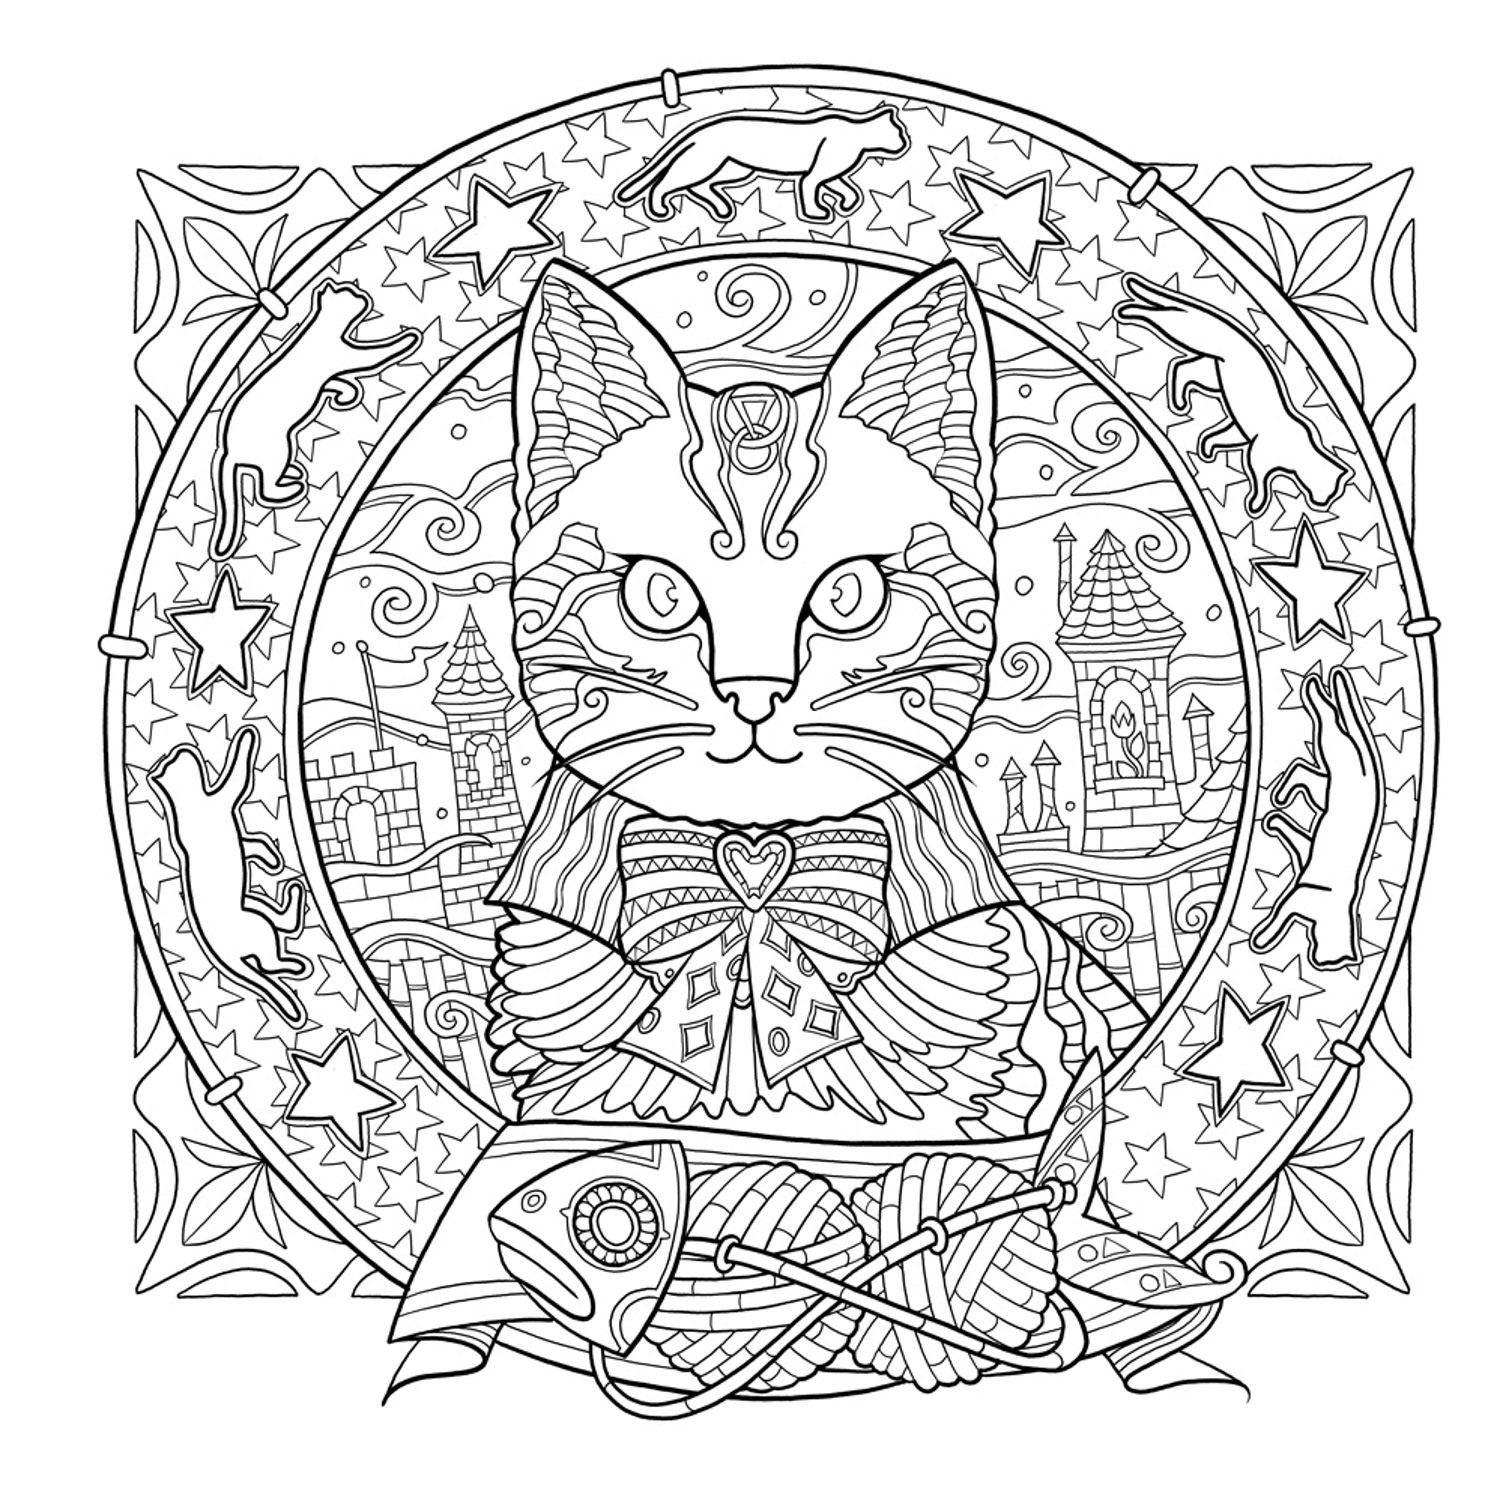 Grayscale Coloring Pages Free at GetDrawings Free download